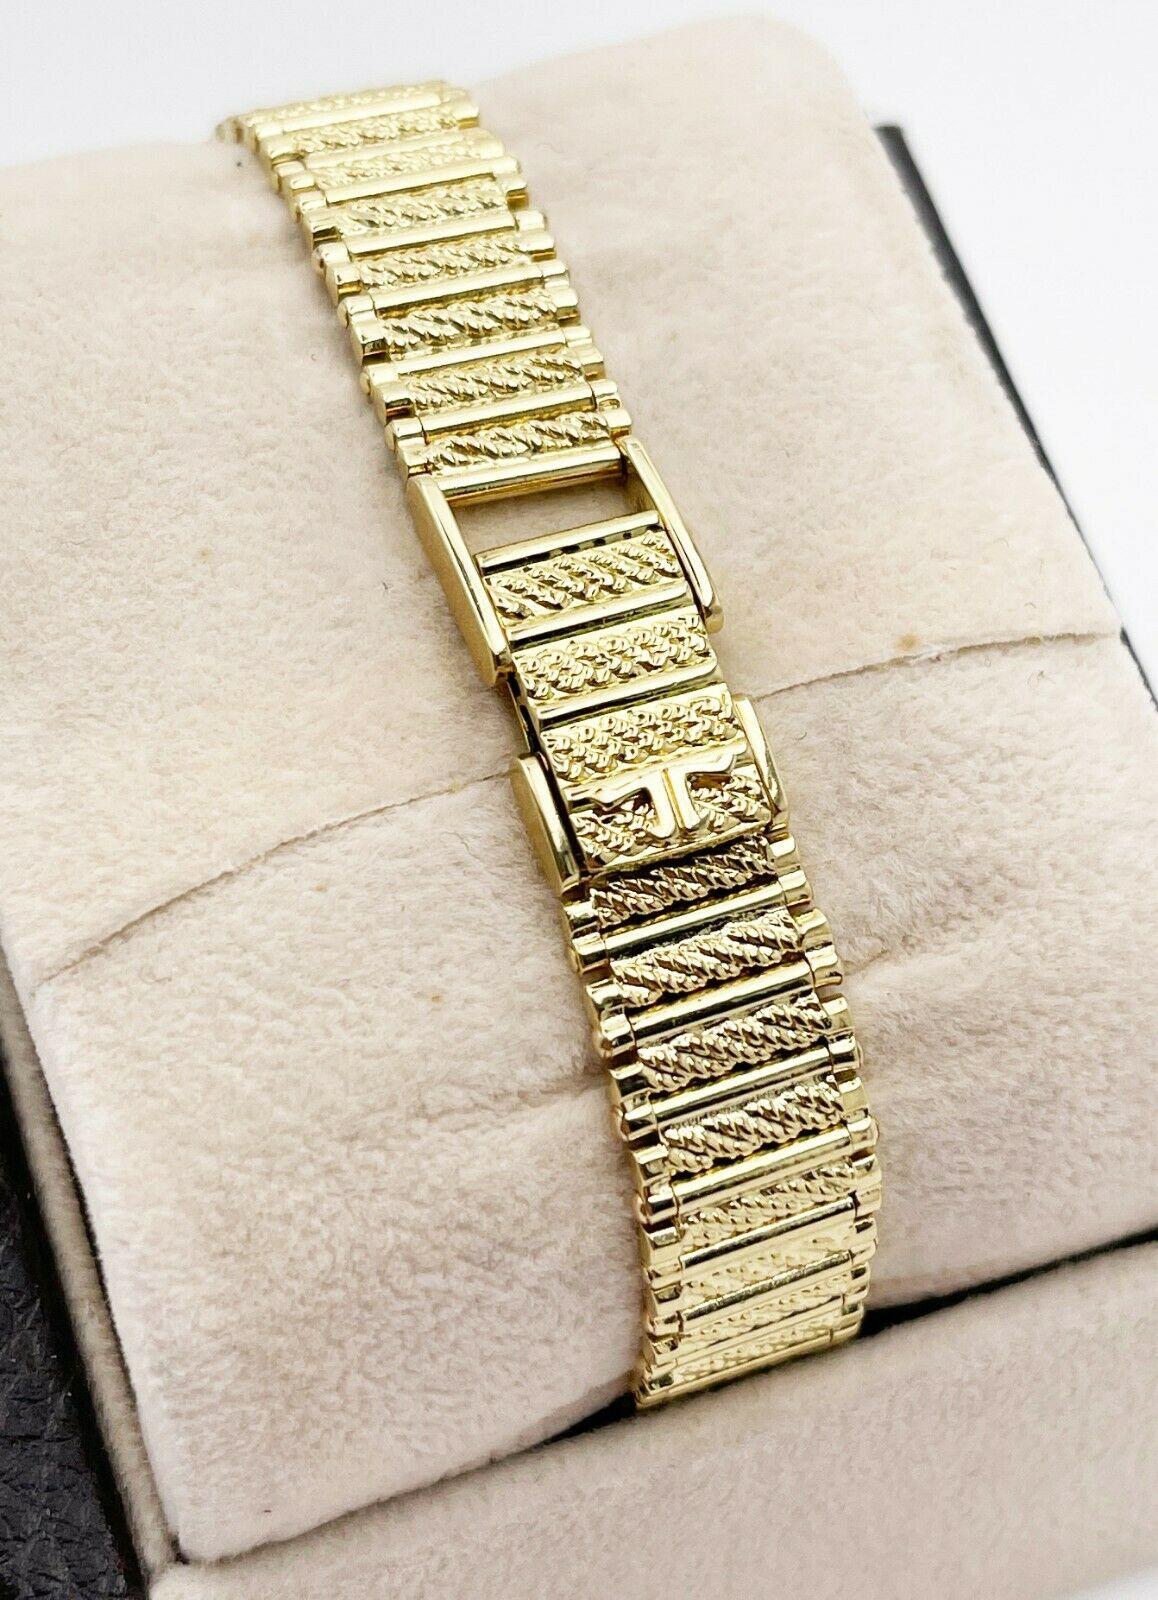 Jaeger-LeCoultre Diamond Bezel Ladies Watch 18 Karat Yellow Gold Watch In Excellent Condition For Sale In San Diego, CA